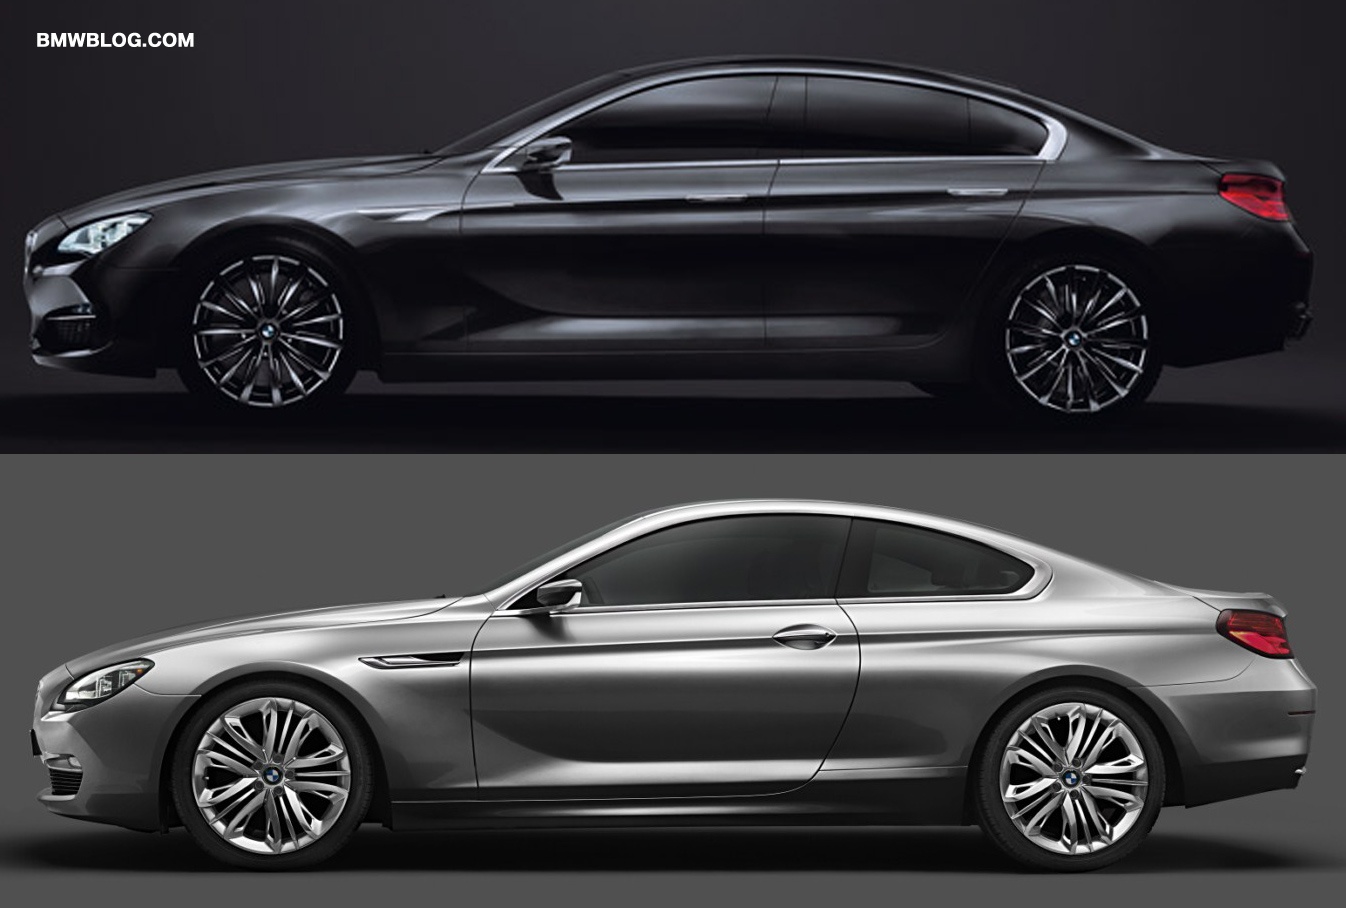  Coupe on The Upcoming Gran Coupe Would Be Positioned Alongside The 6 Series In